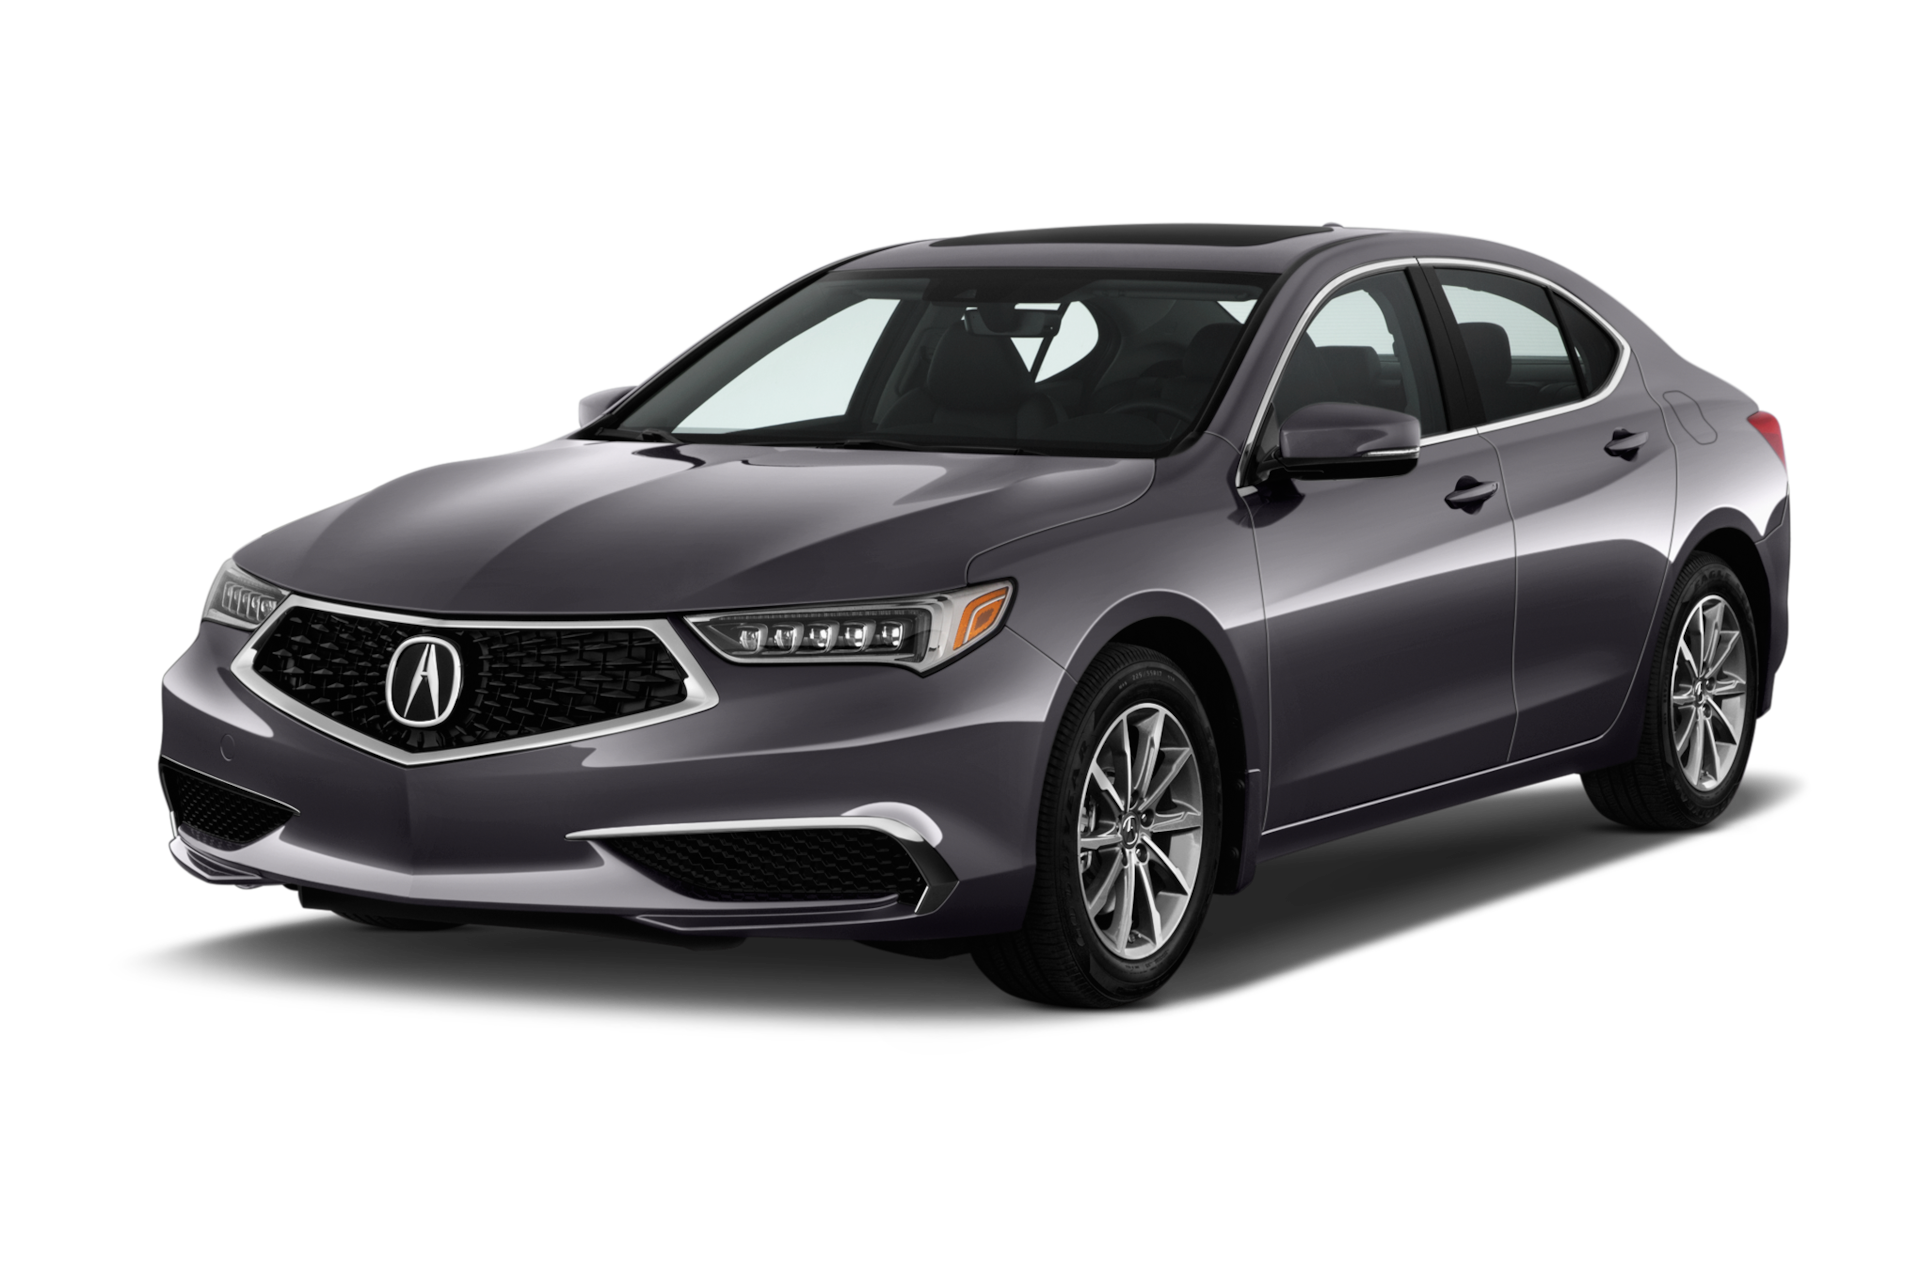 2019 Acura TLX Prices, Reviews, and Photos - MotorTrend